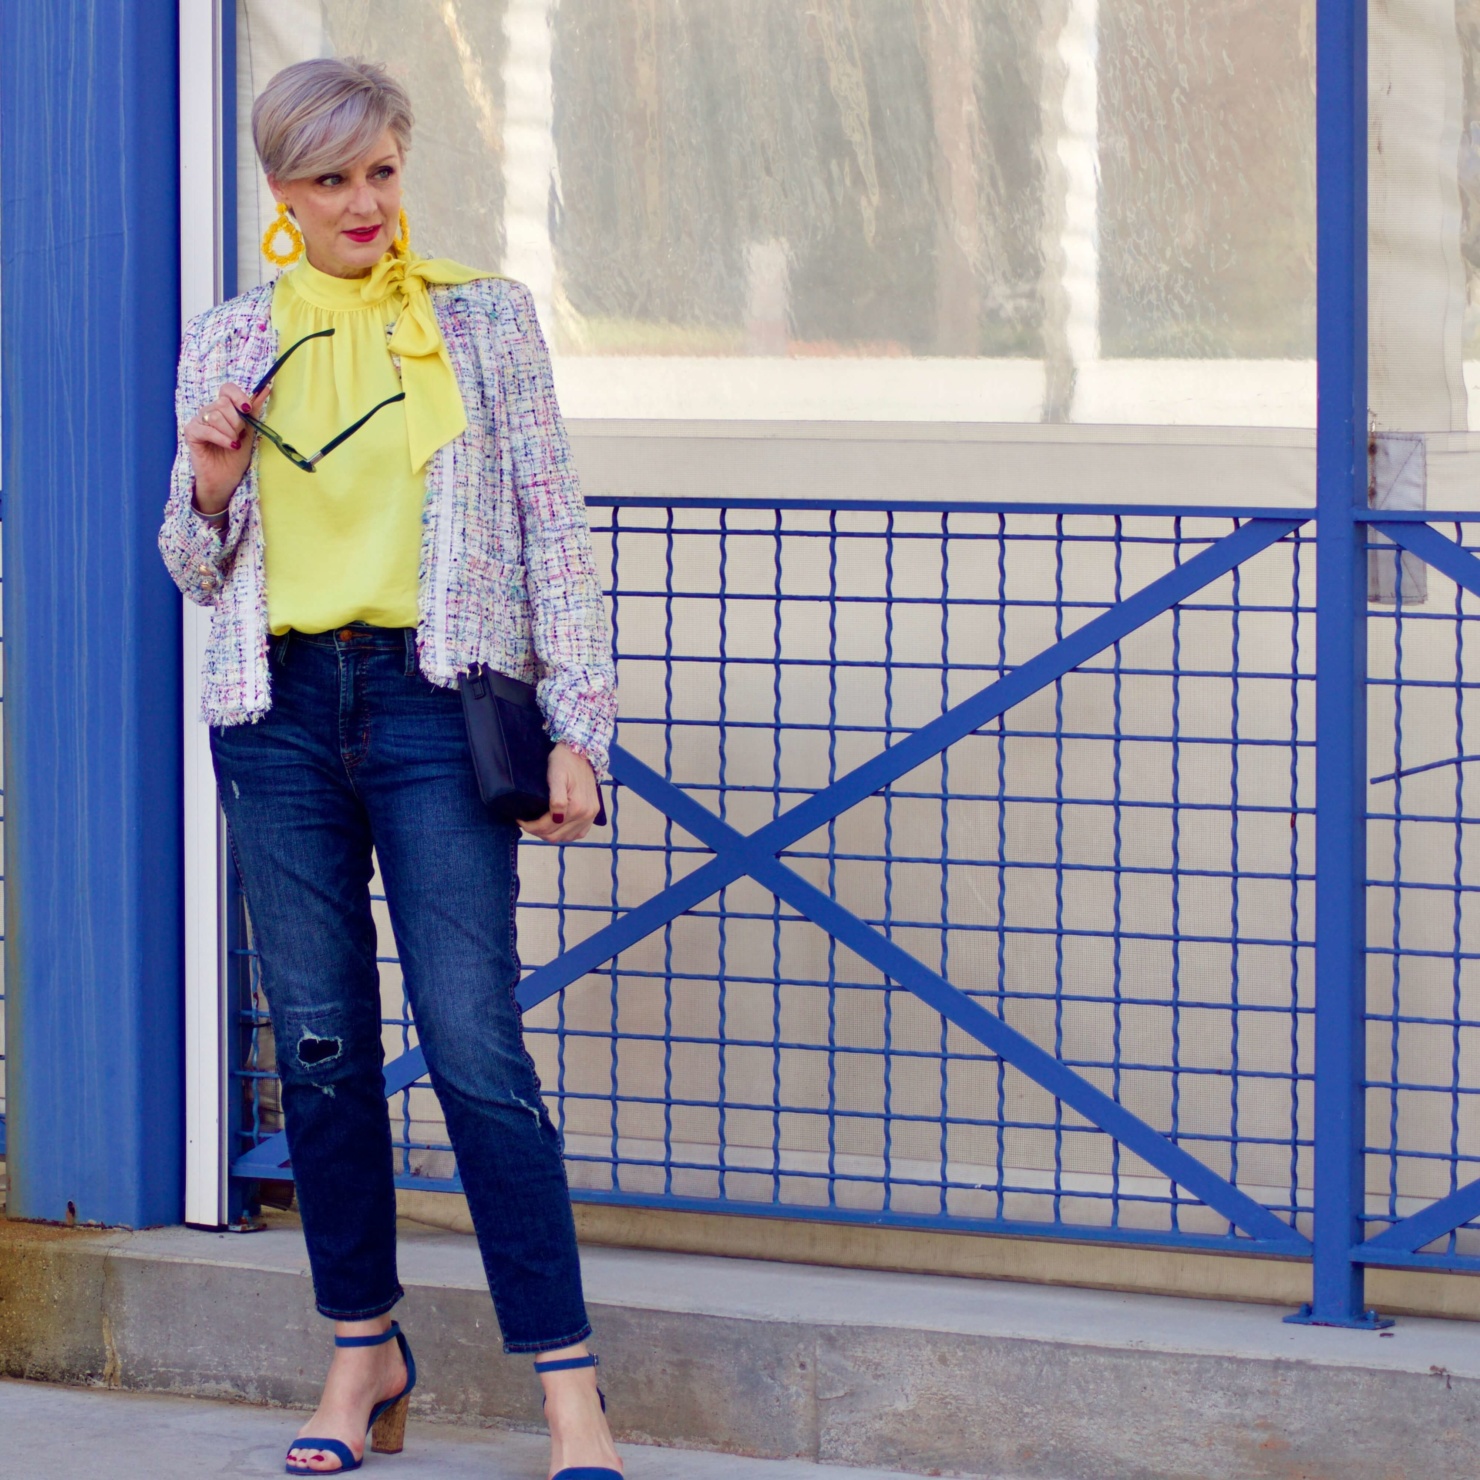 beth from Style at a Certain Age wears a tweed jacket from JC Penney, yellow tie blouse, distressed denim and sandals